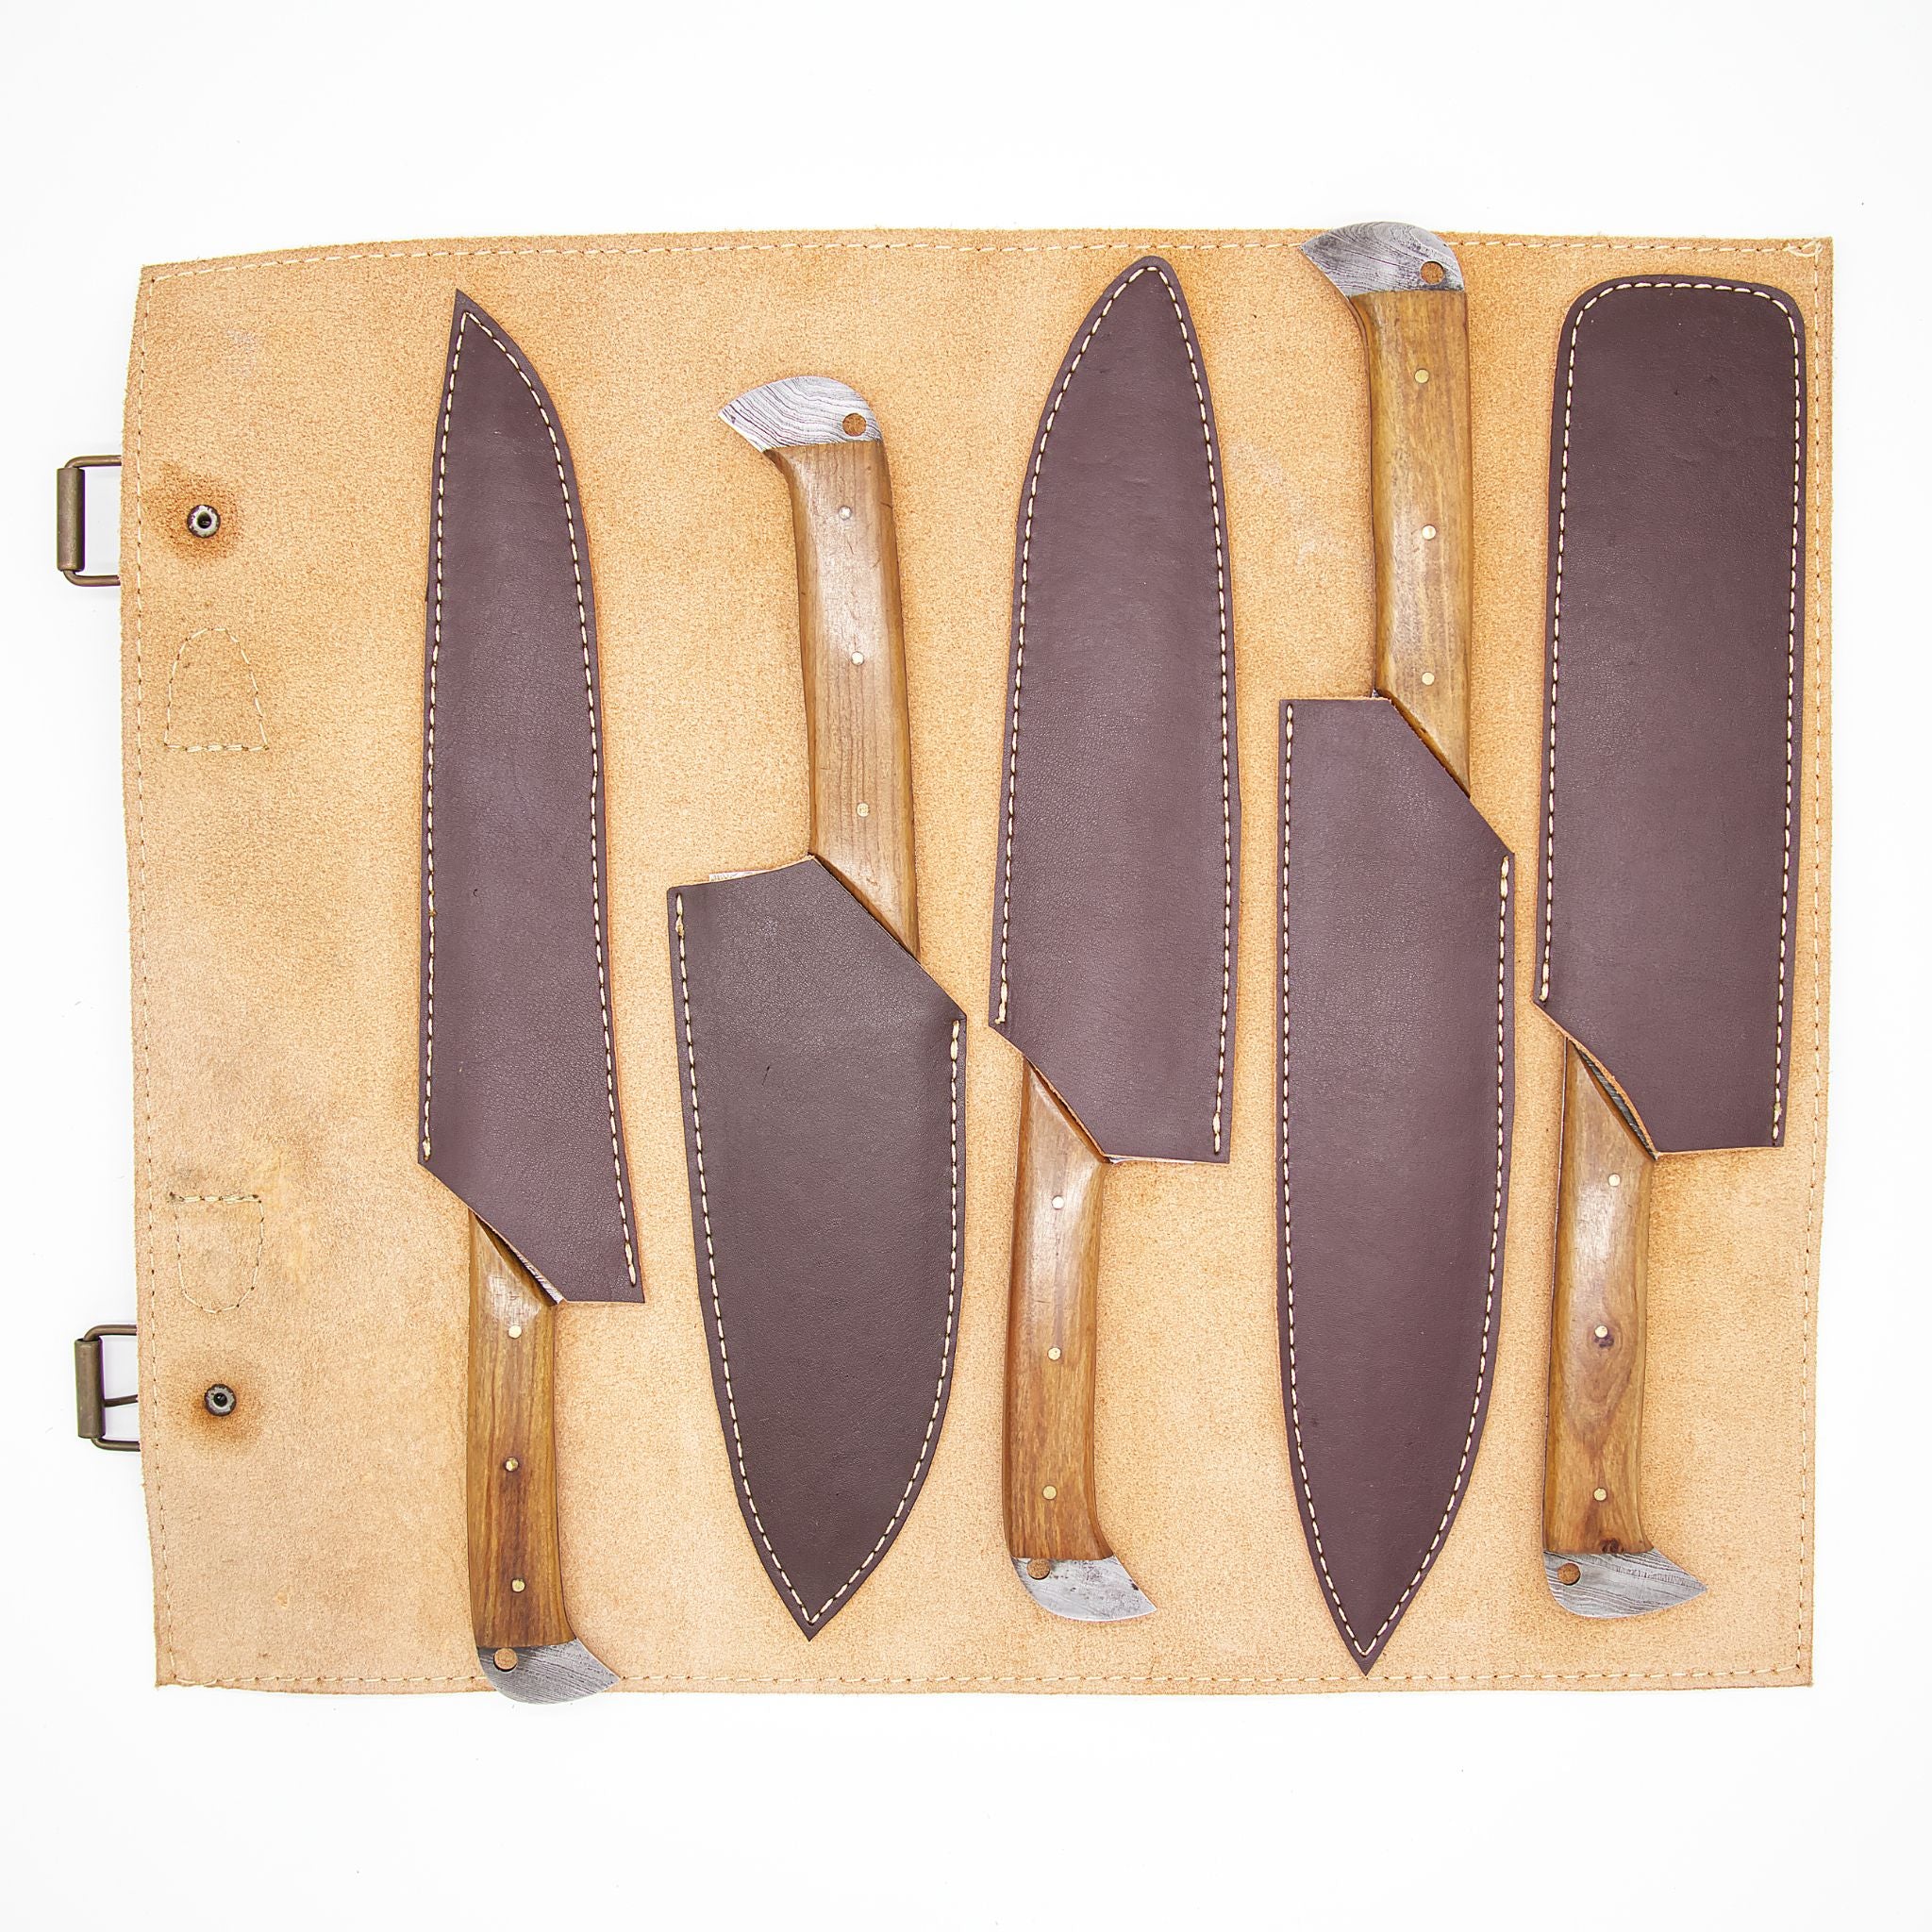 Chef Knife Set I, Damascus Steel, Handmade, with Genuine Leather Roll